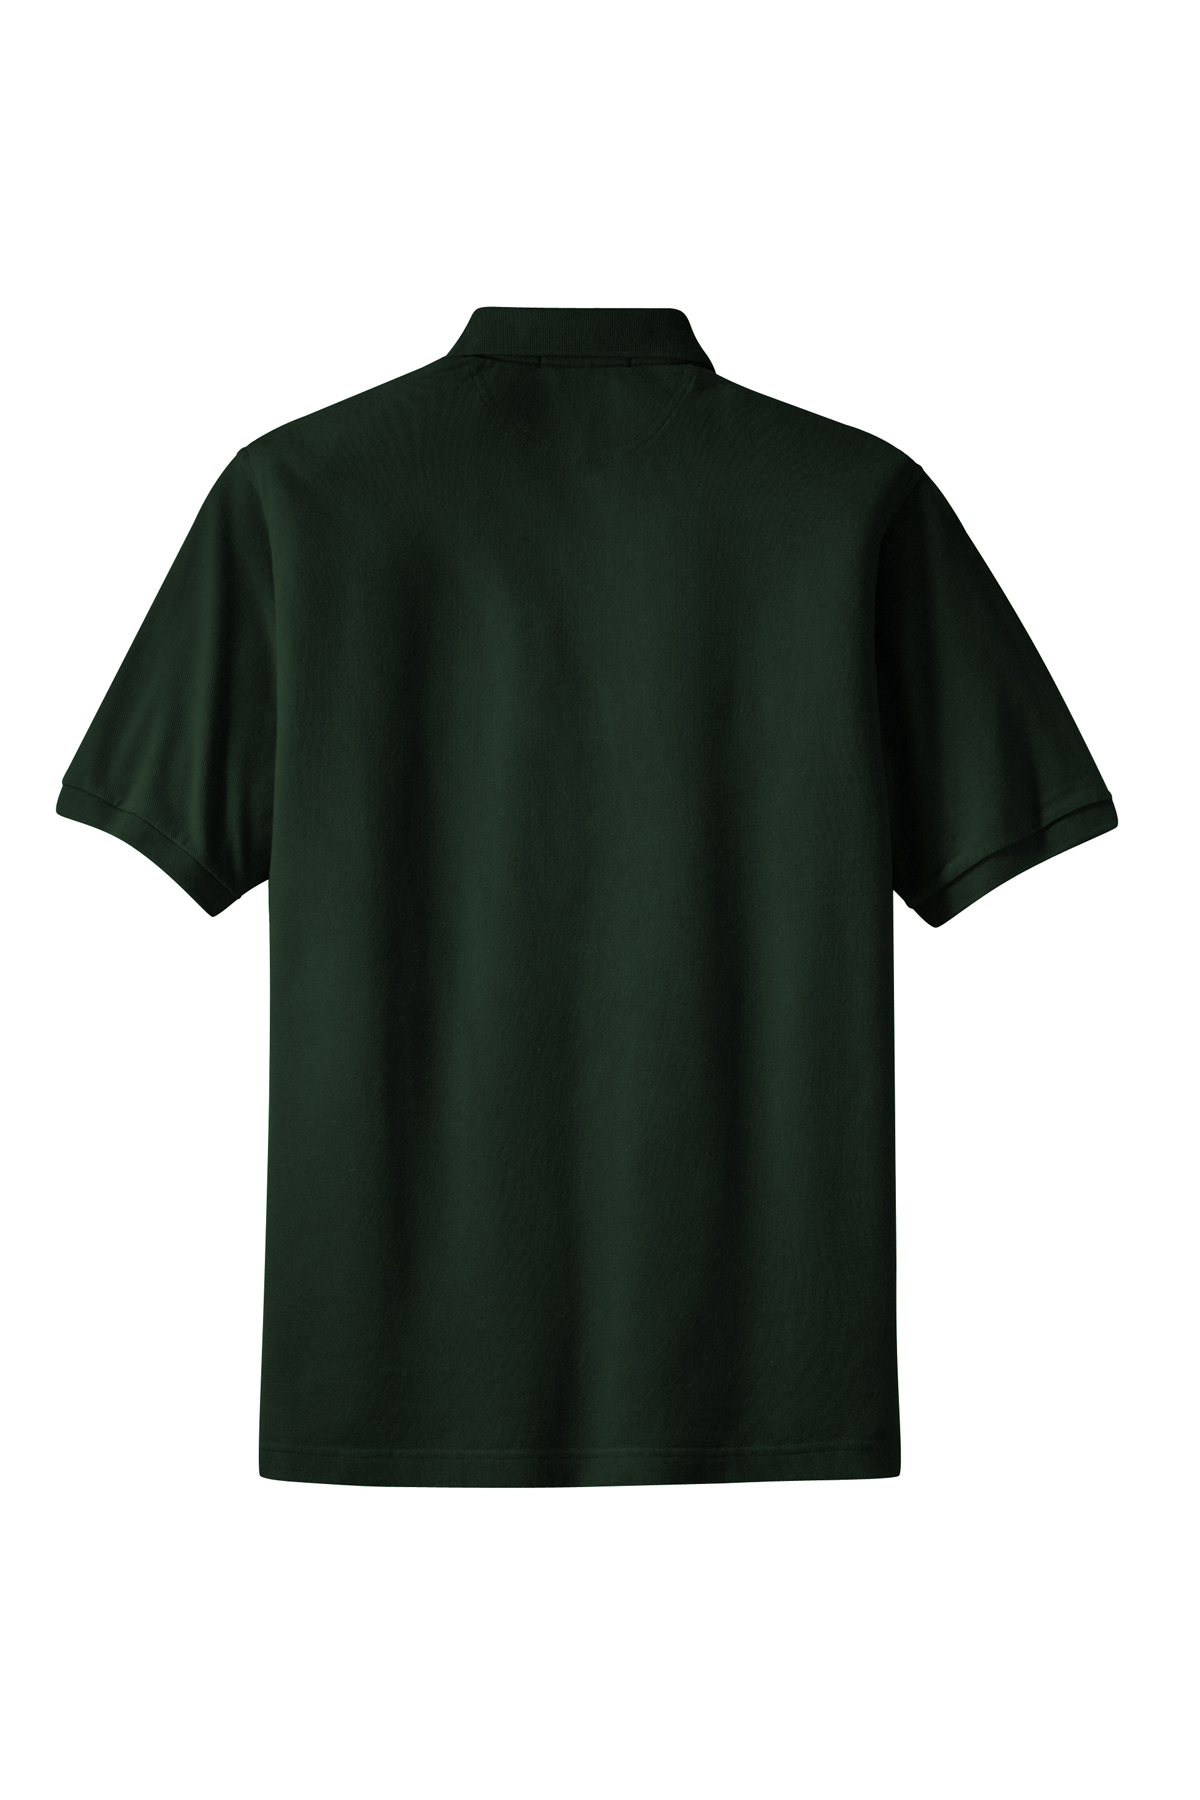 Port Authority Heavyweight Cotton Pique Polo with Pocket | Product | SanMar